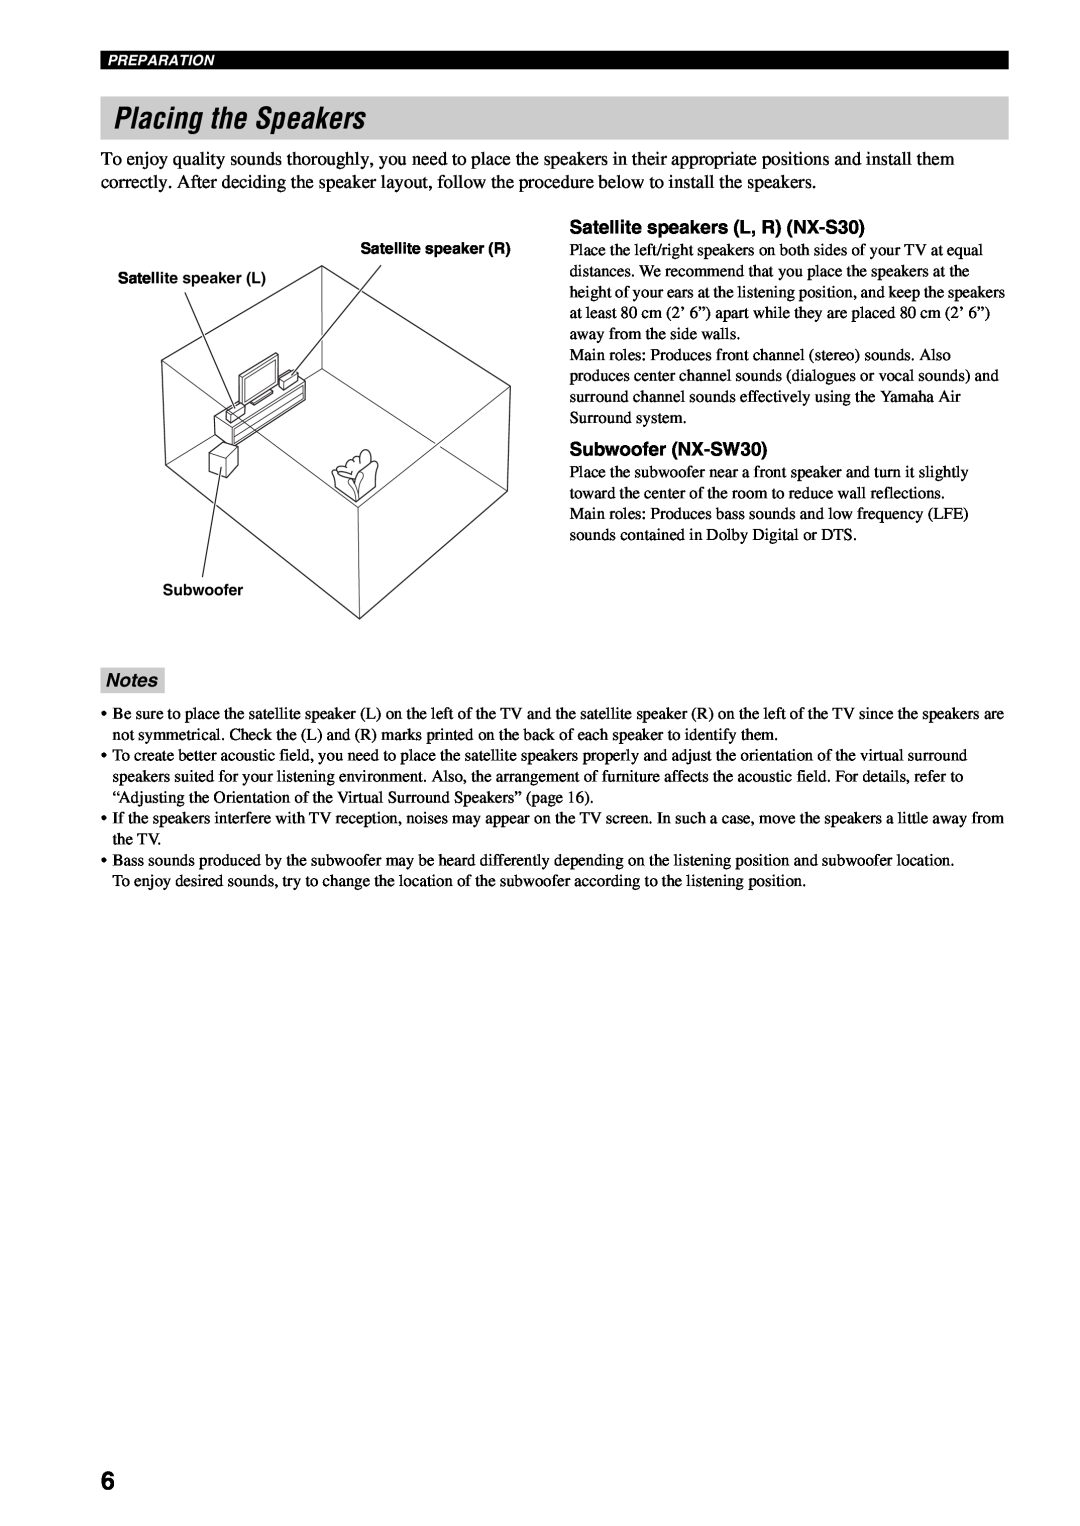 Yamaha AVX-S30 owner manual Placing the Speakers, Satellite speakers L, R NX-S30, Subwoofer NX-SW30, Notes 